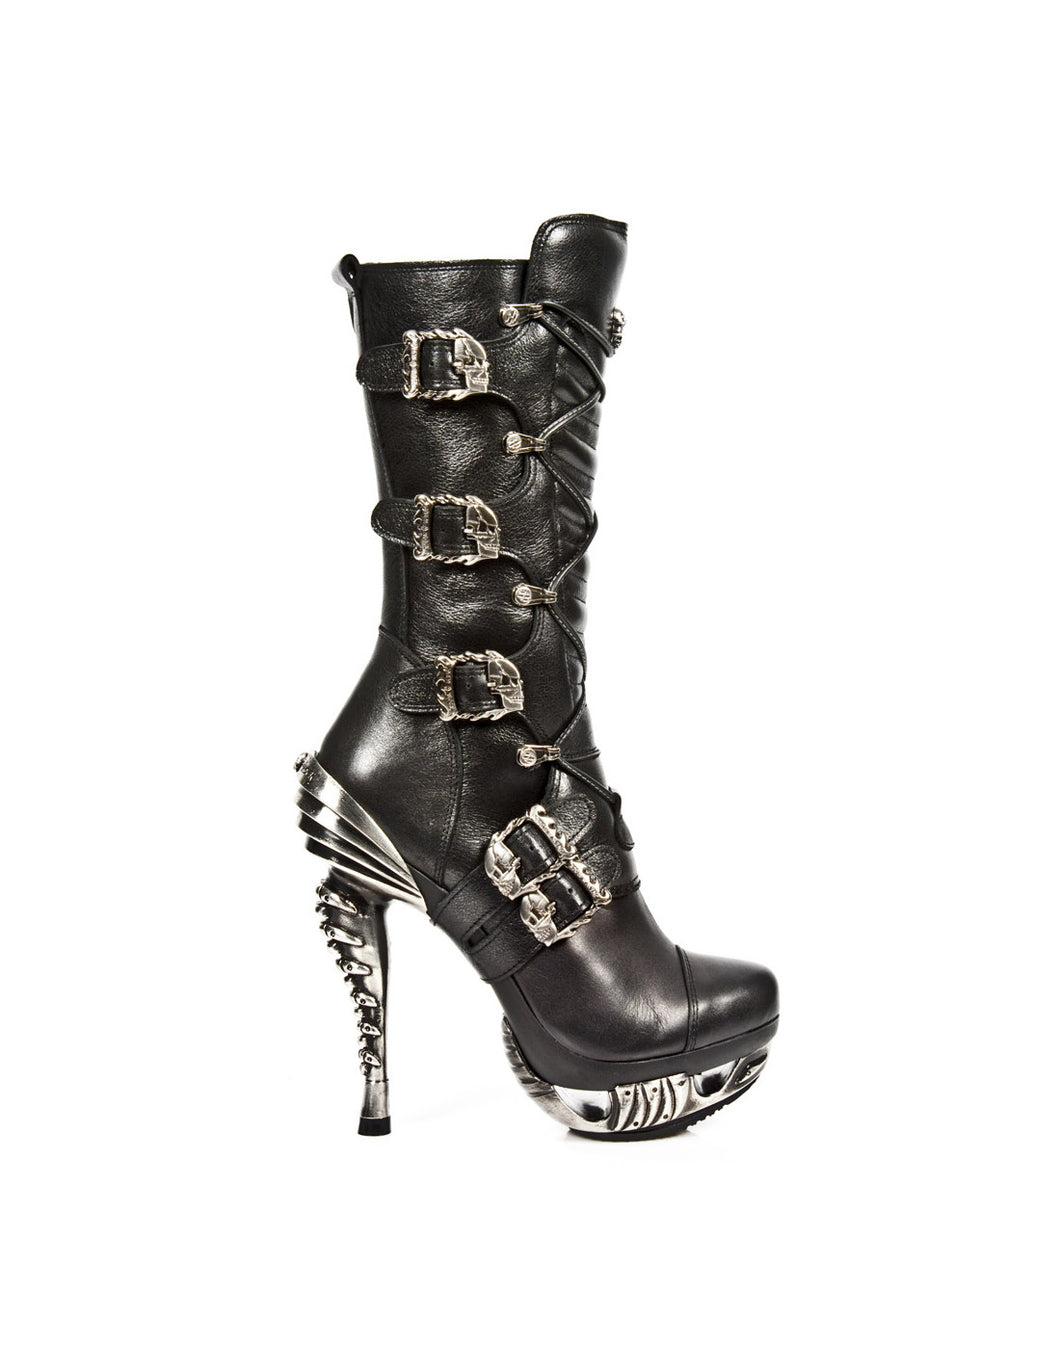 New Rock Shoes Women's Boots Boots Shoes Gothic M-MAG006-S1 Buckles Punk Skull